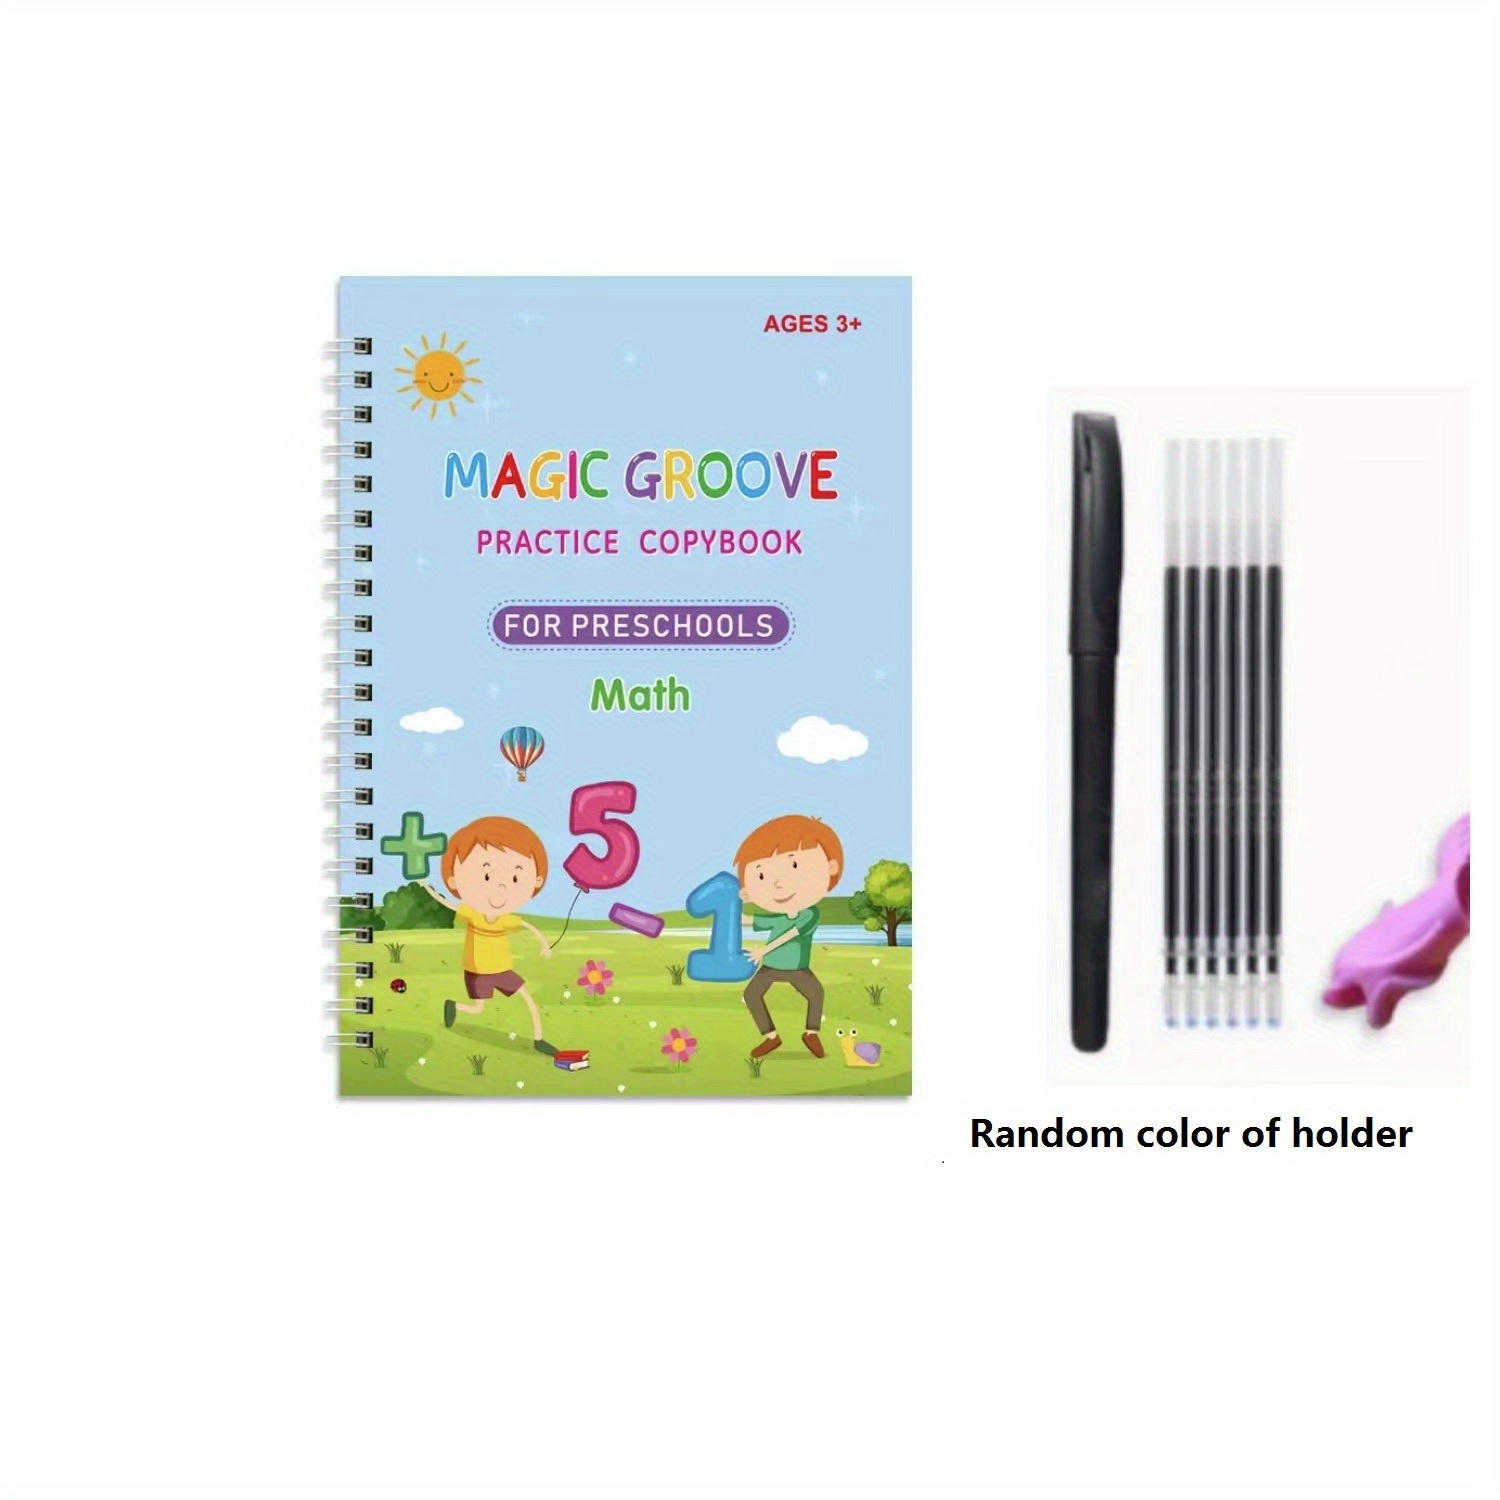 New Groovd Magic Copybook Grooved Children's Handwriting Book Set Gift